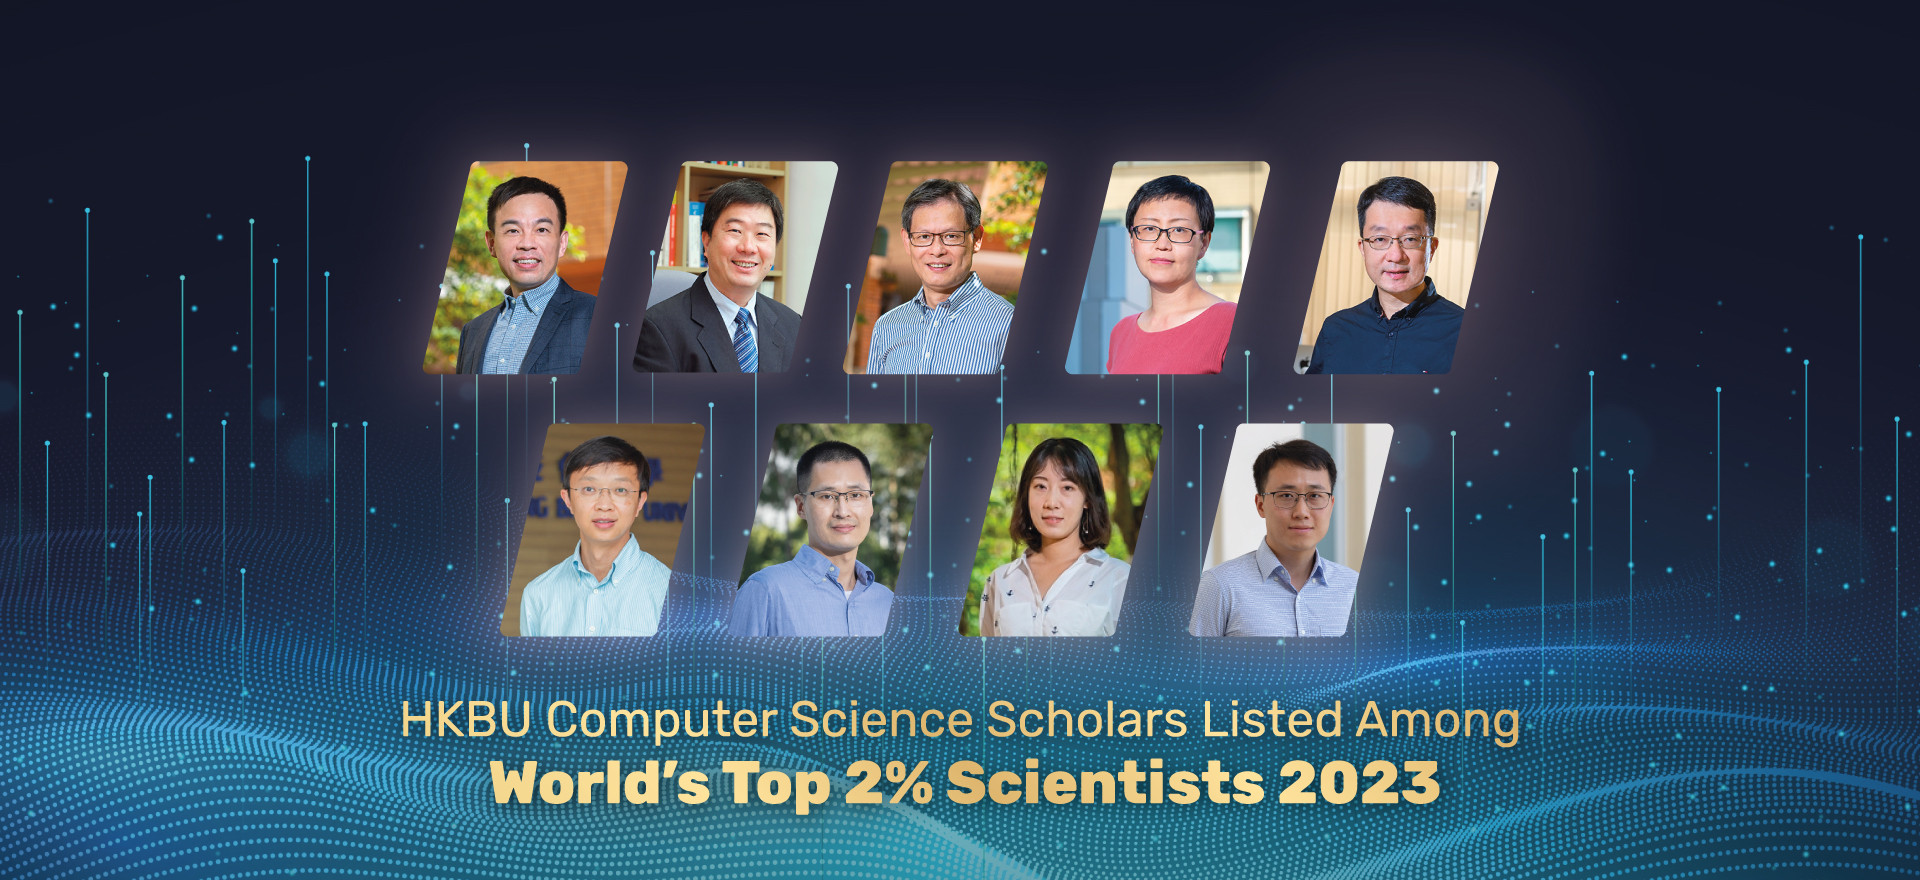 HKBU COMP Scholars Ranked the World’s Top 2% Most-cited Scientists by Stanford University